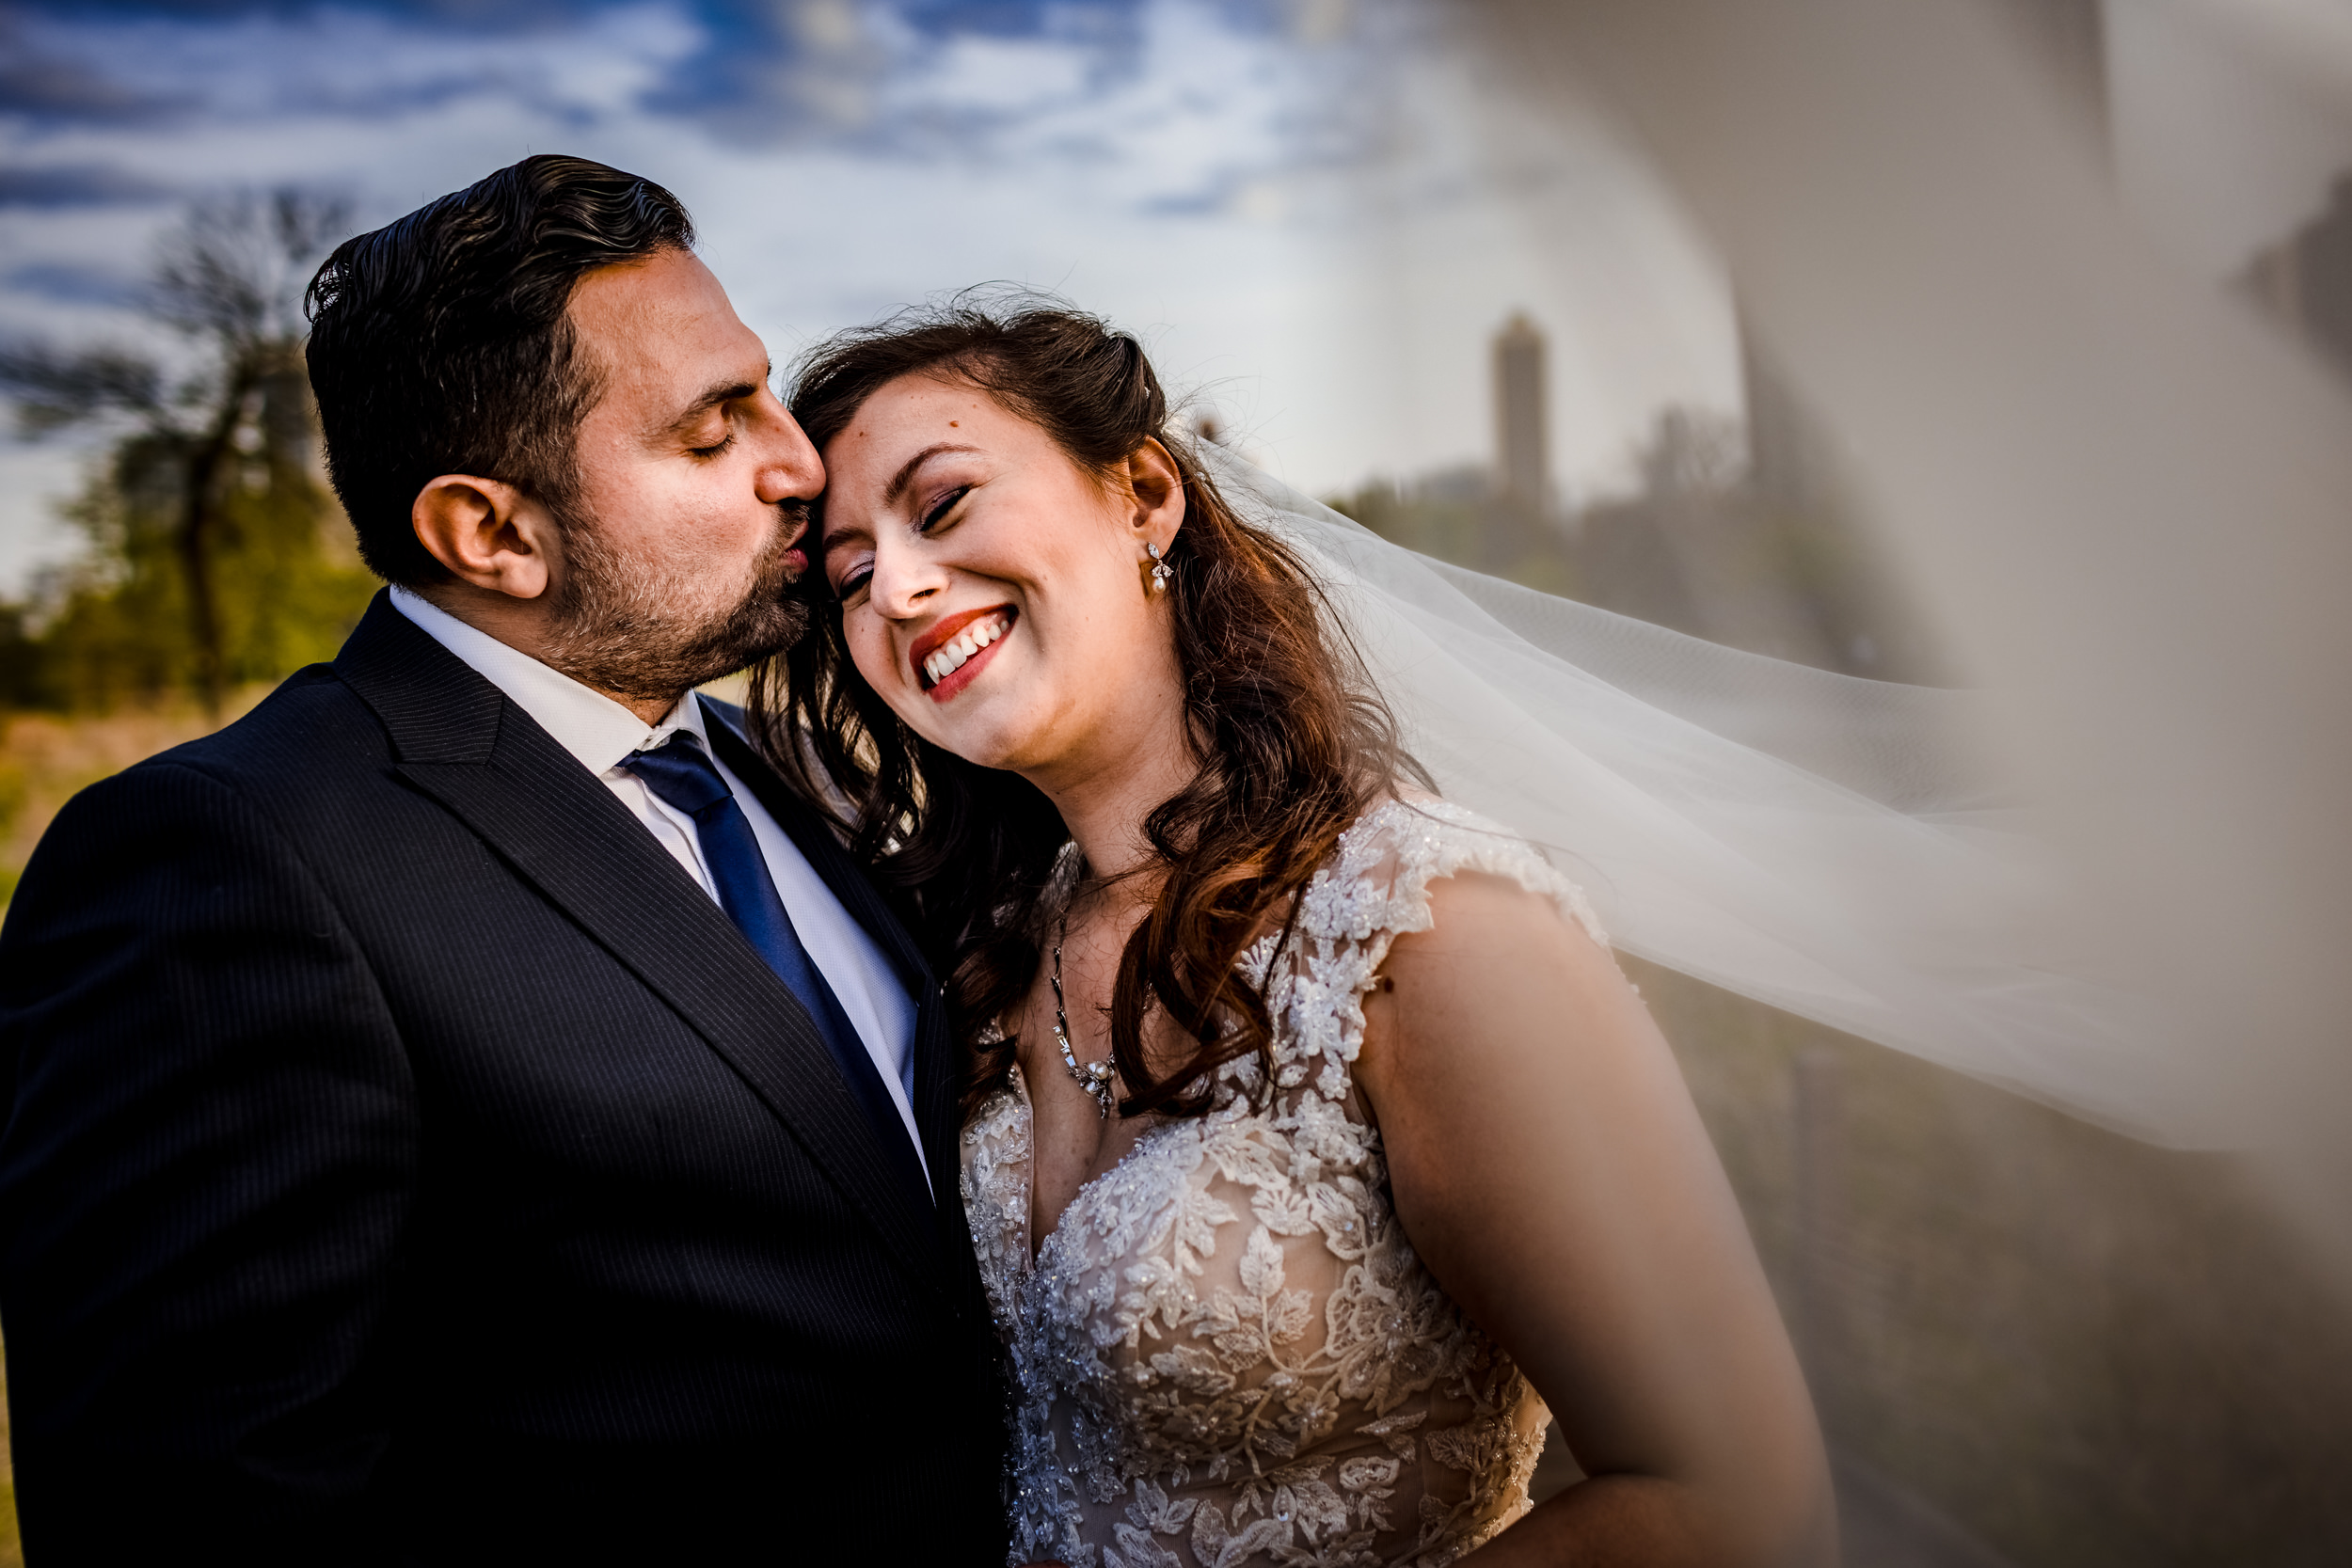 A groom kisses his bride during a Lincoln Park elopement in Chicago.